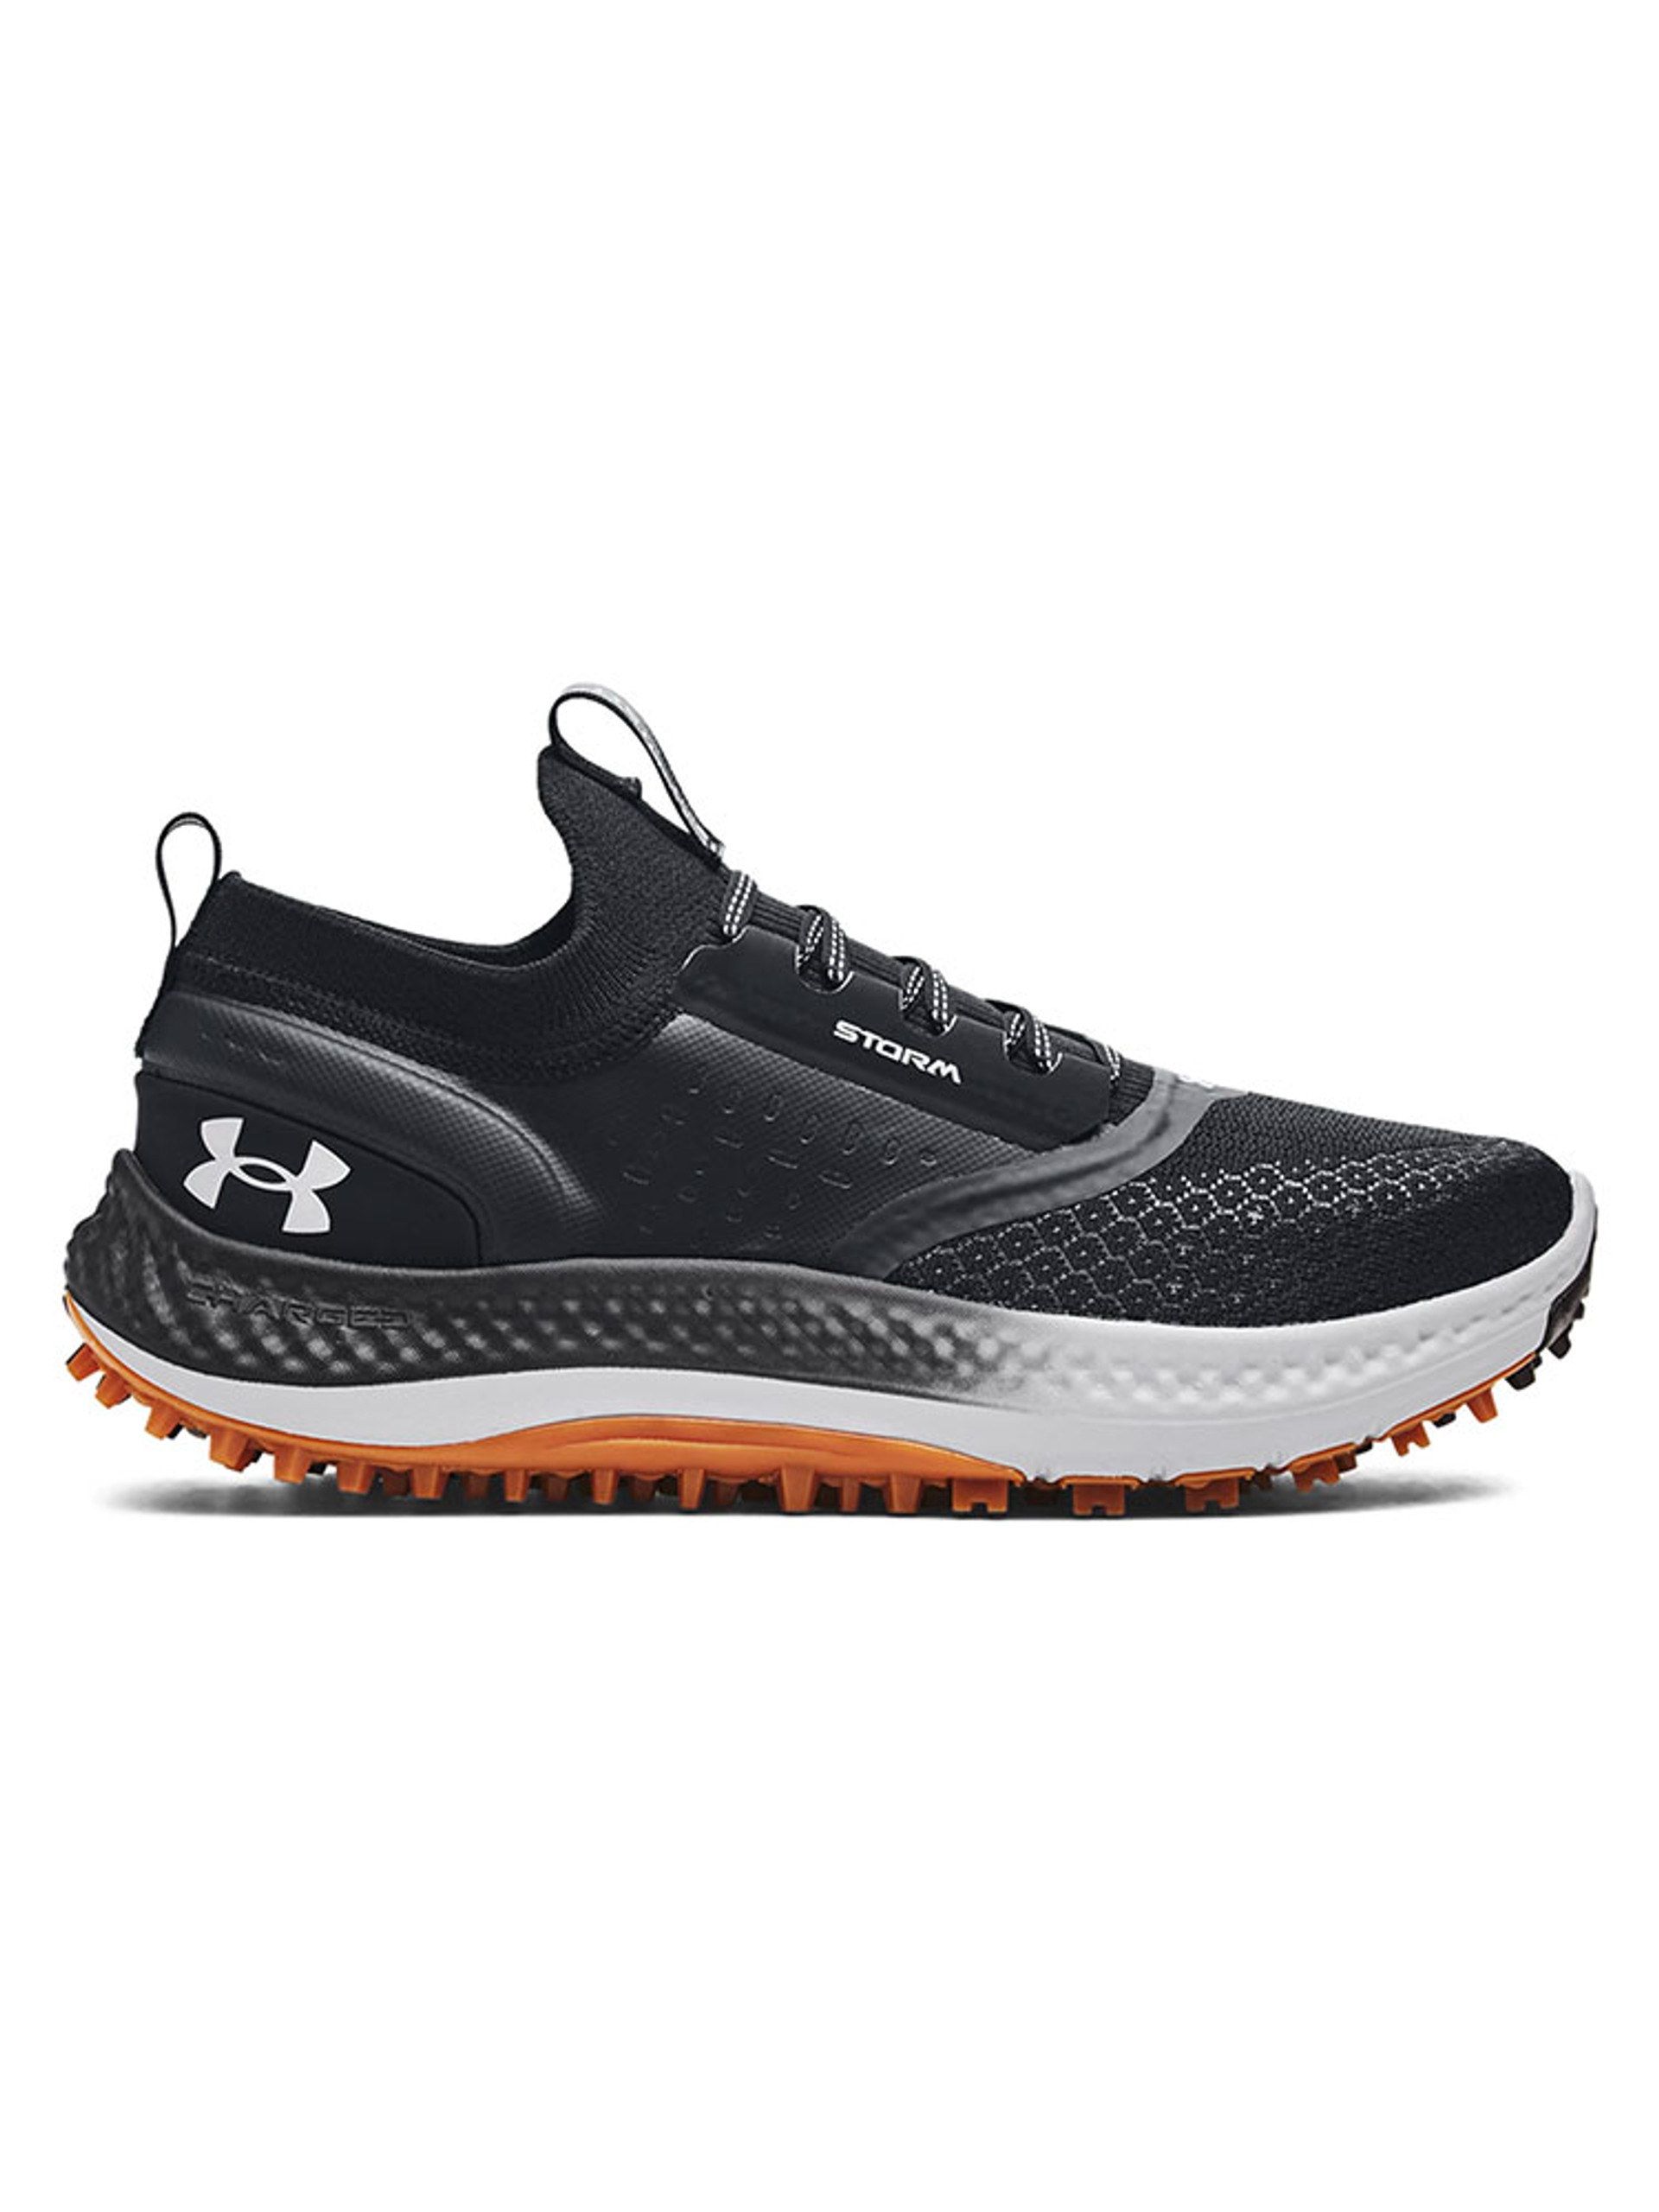 Under Armour Charged Phantom Spikeless Golf Shoes - Black/Steel - Mens ...